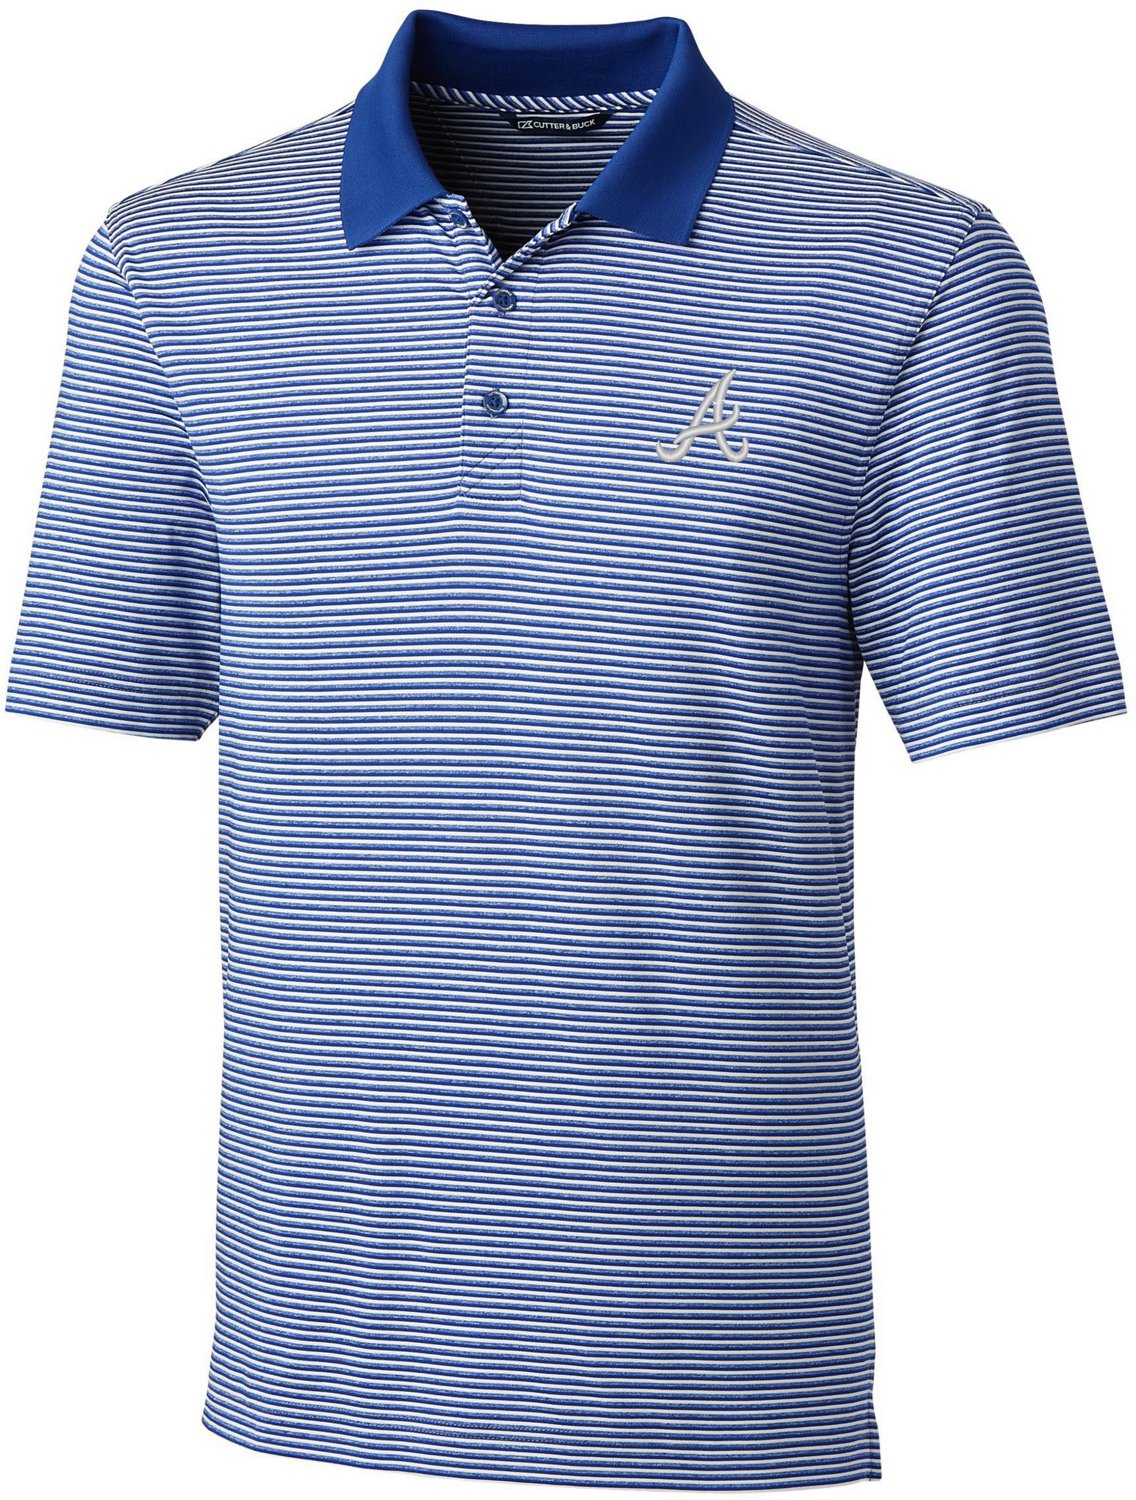 Atlanta Braves Cutter & Buck Big & Tall Forge Eco Heathered Stripe Stretch  Recycled Polo - Heather Navy